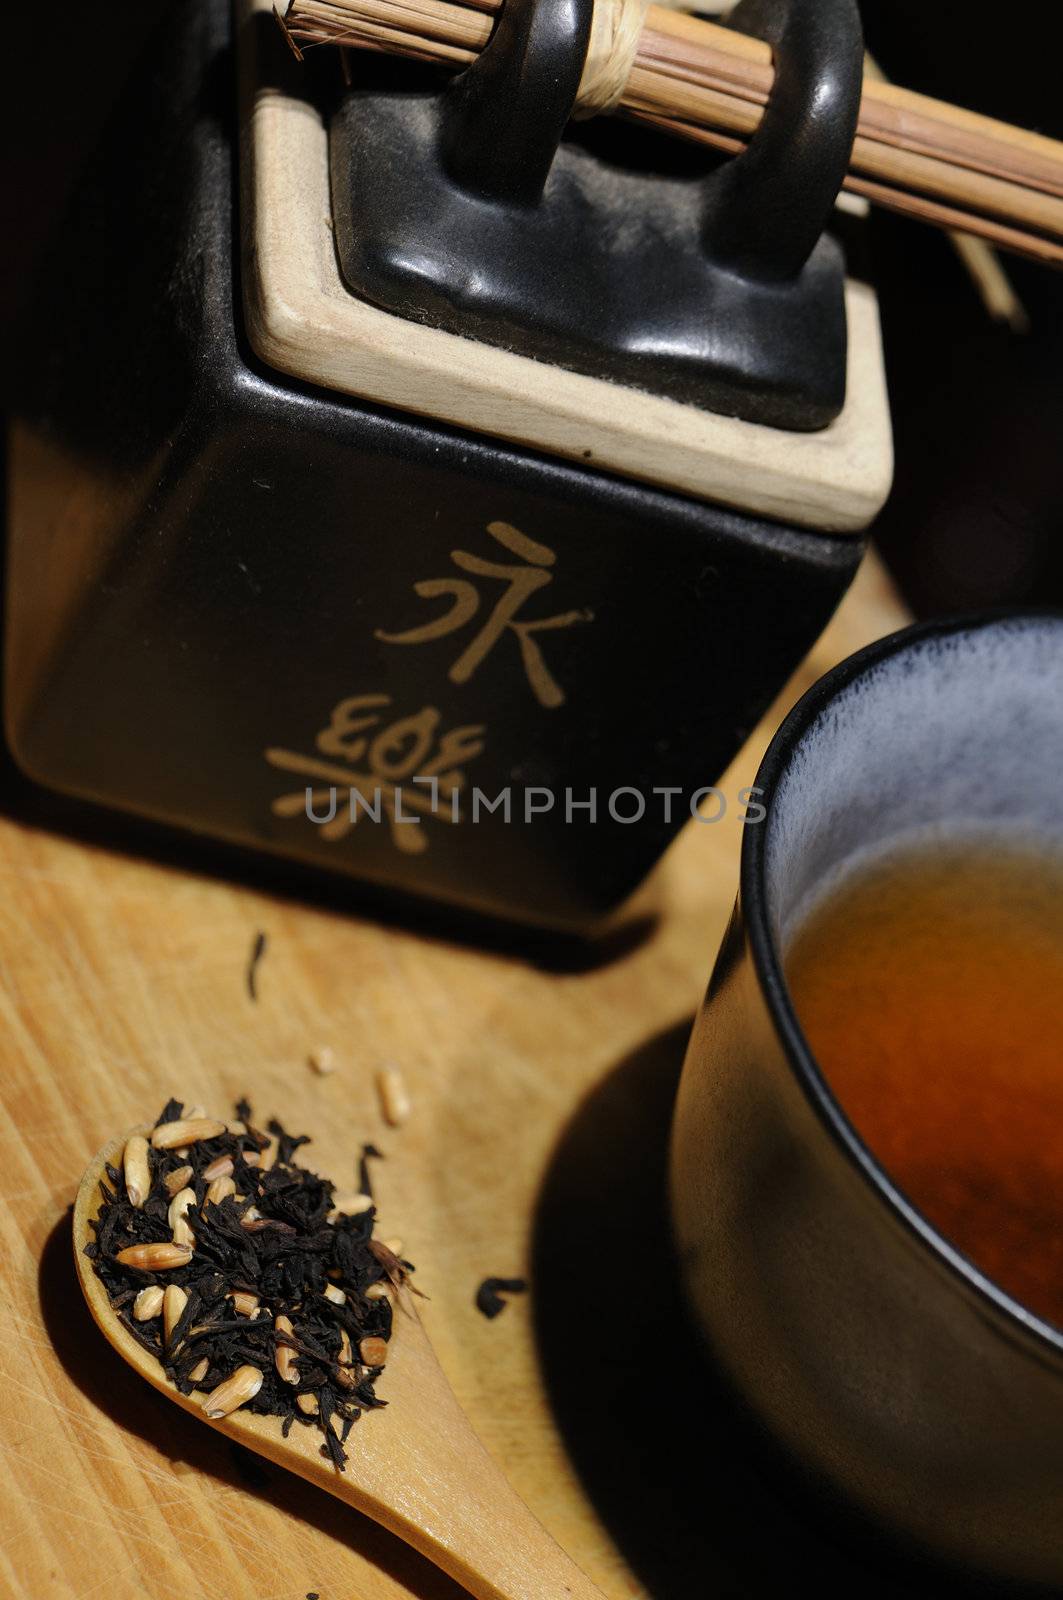 Asian black tea set with rice grains over wood background